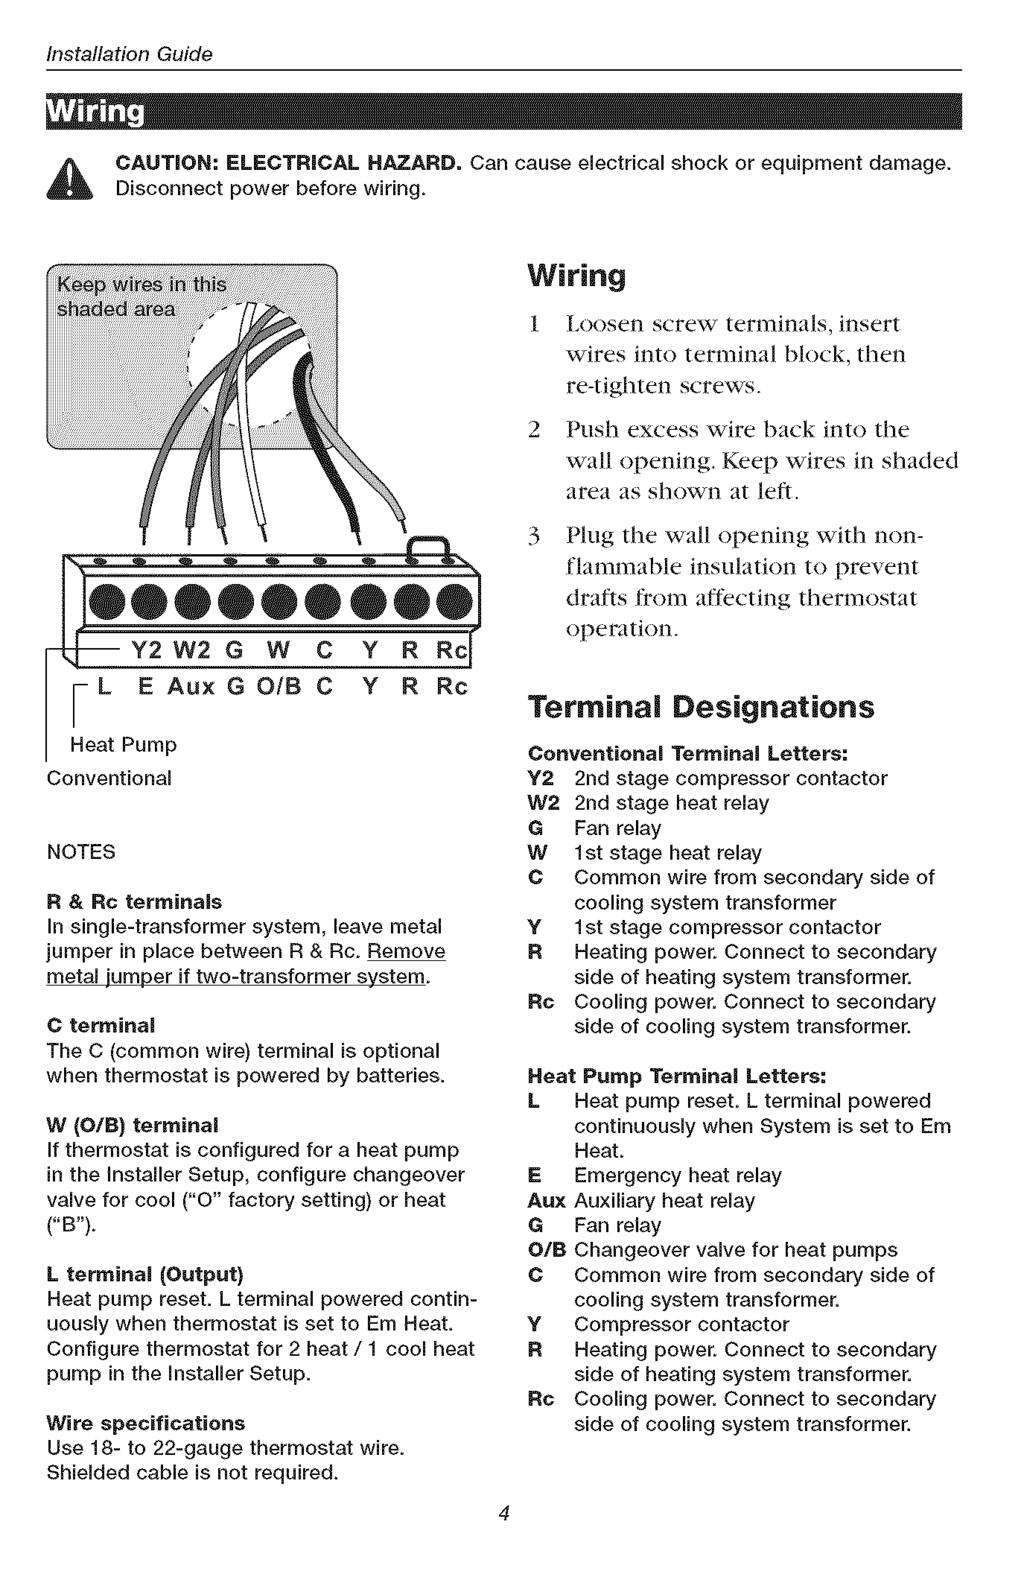 Installation Guide o " CAUTION: ELECTRICAL HAZARD. Can cause electrical shock or equipment damage. Disconnect power before wiring.